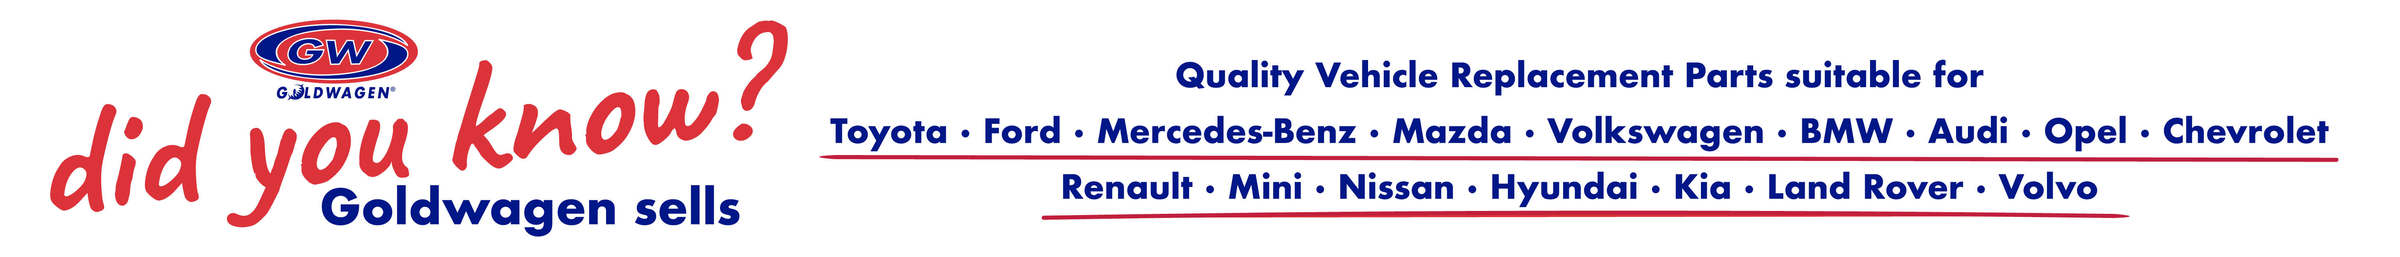 Quality vehicle replacement parts suitable for Volkswagen, Audi, Opel, BMW, Mercedes, Mini, Toyota, Chevrolet, Renault, Ford, Mazda, Nissan, Kia and Hyundai 